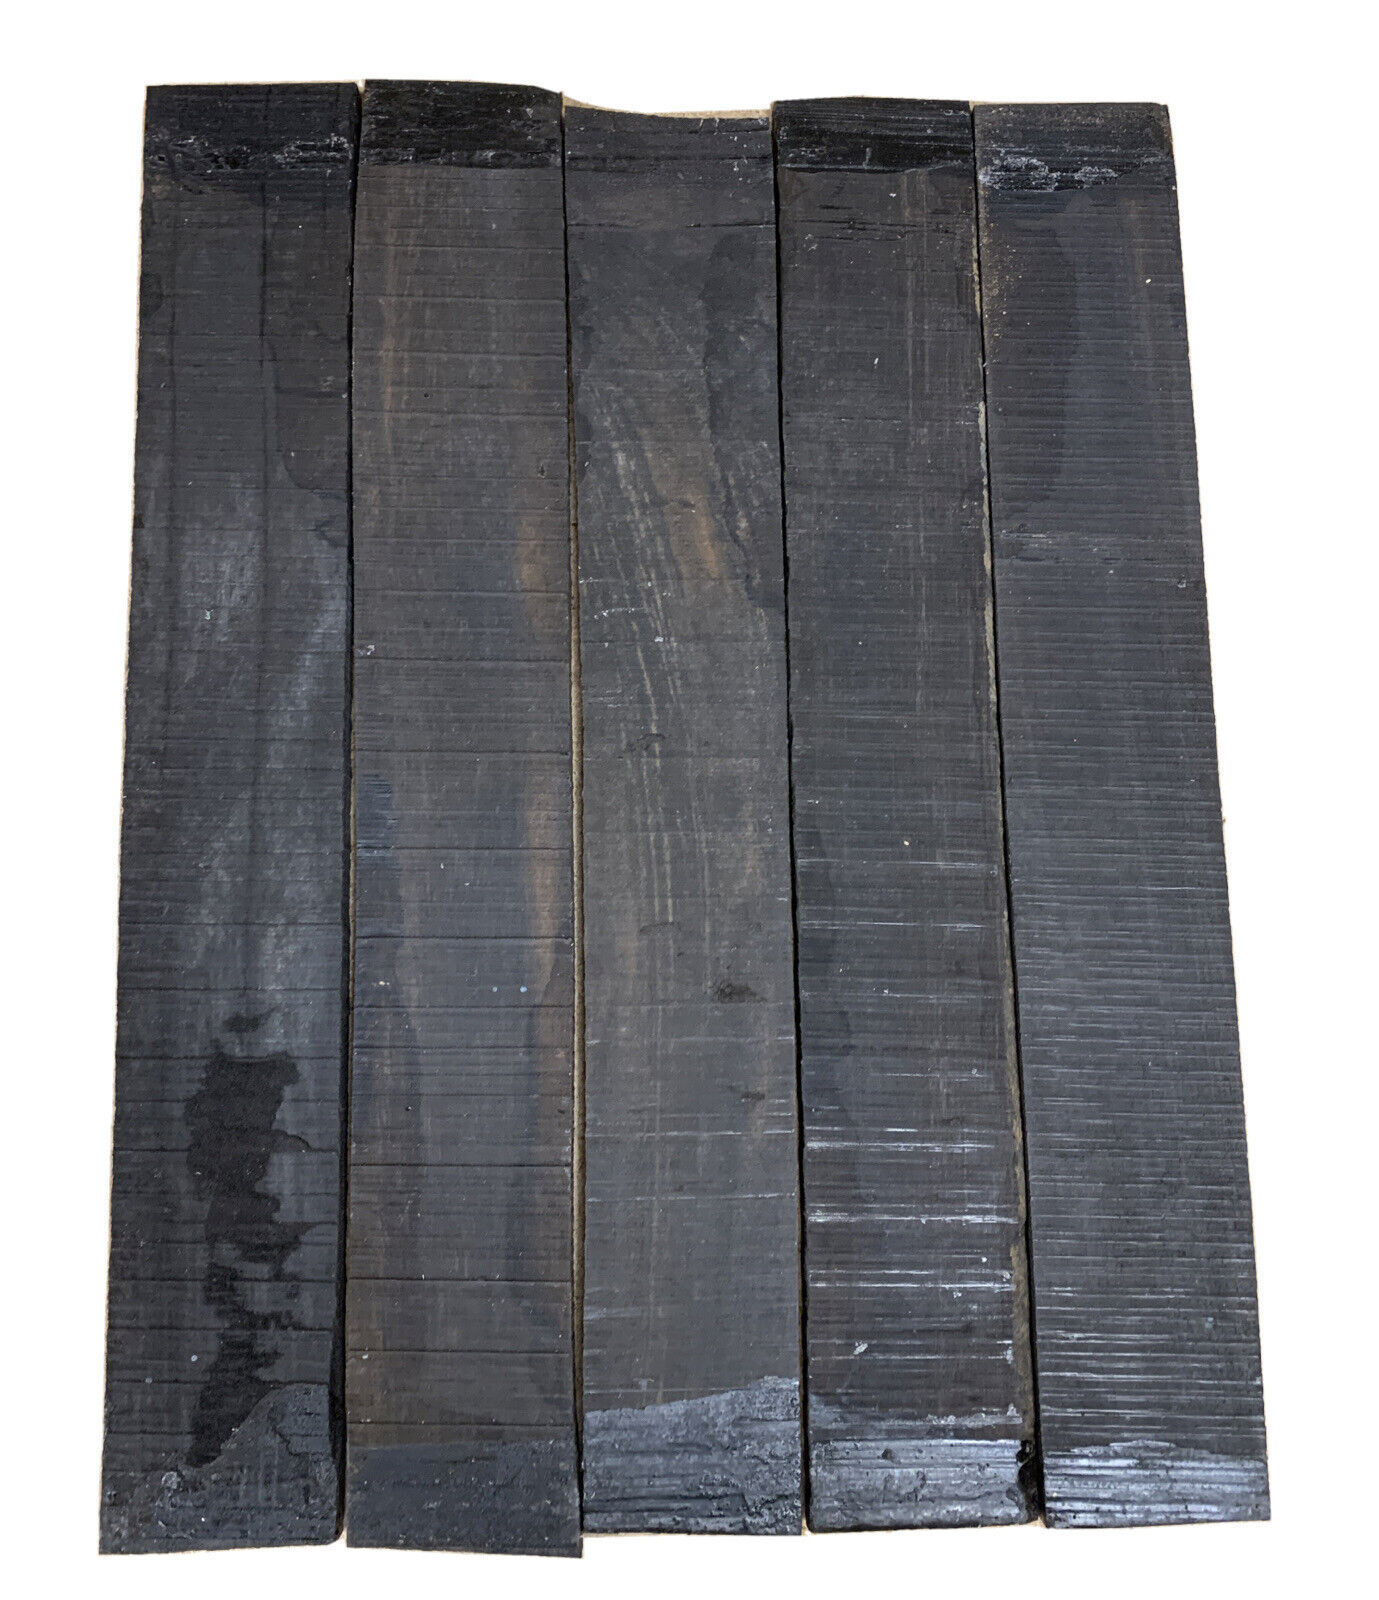 5 Pack, Gaboon Ebony Blank//Luthier wood, Fingerboard, Cuttingboard 16" x 2-1/2" EXOTIC WOOD ZONE Does Not Apply